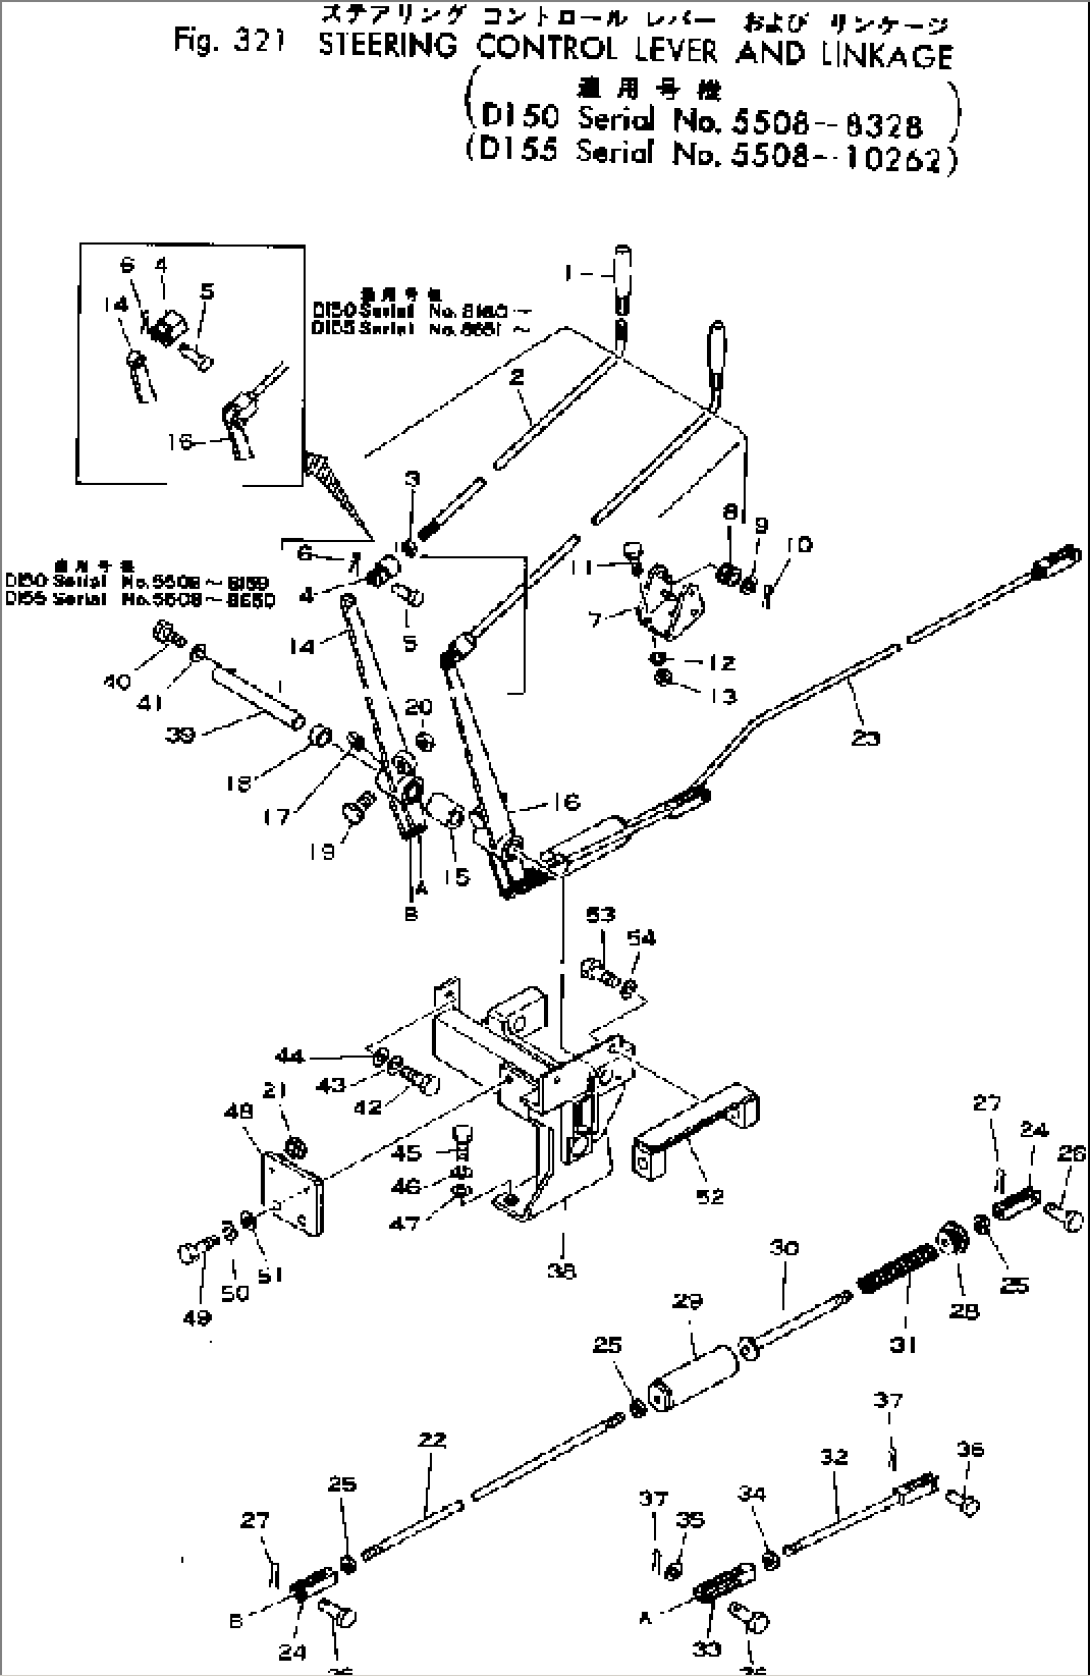 STEERING CONTROL LEVER AND LINKAGE(#5508-8328)